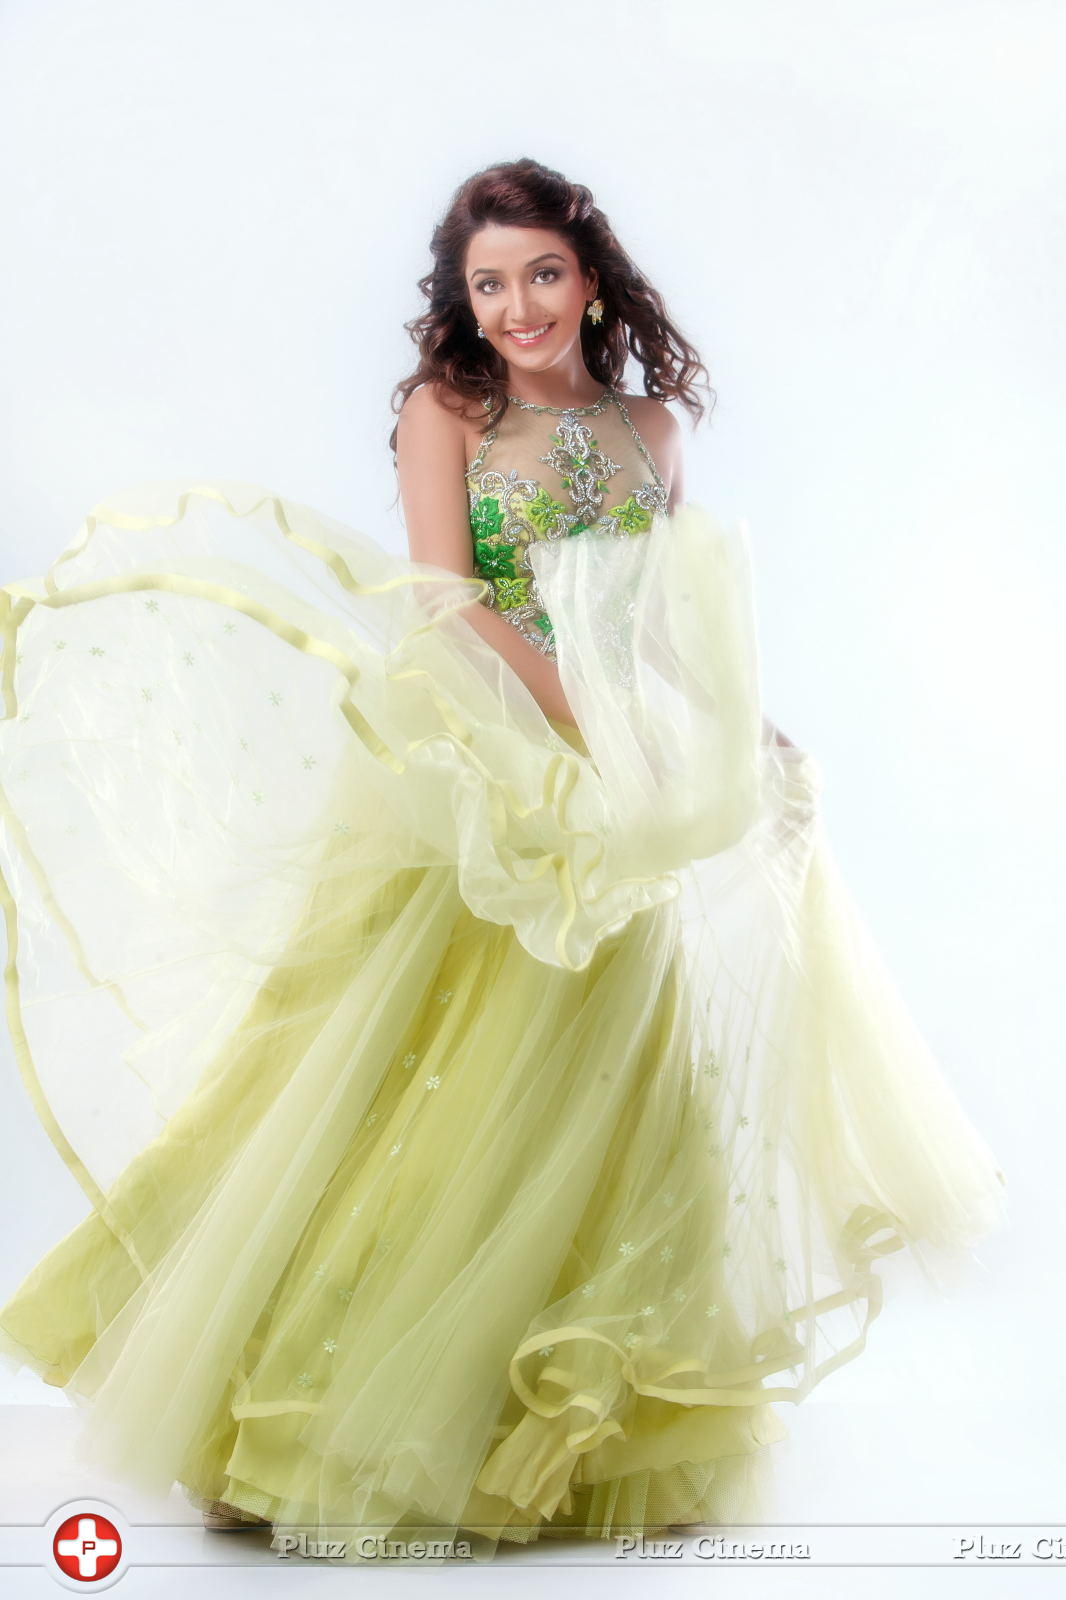 Sonia Mann Photoshoot Gallery | Picture 1015894